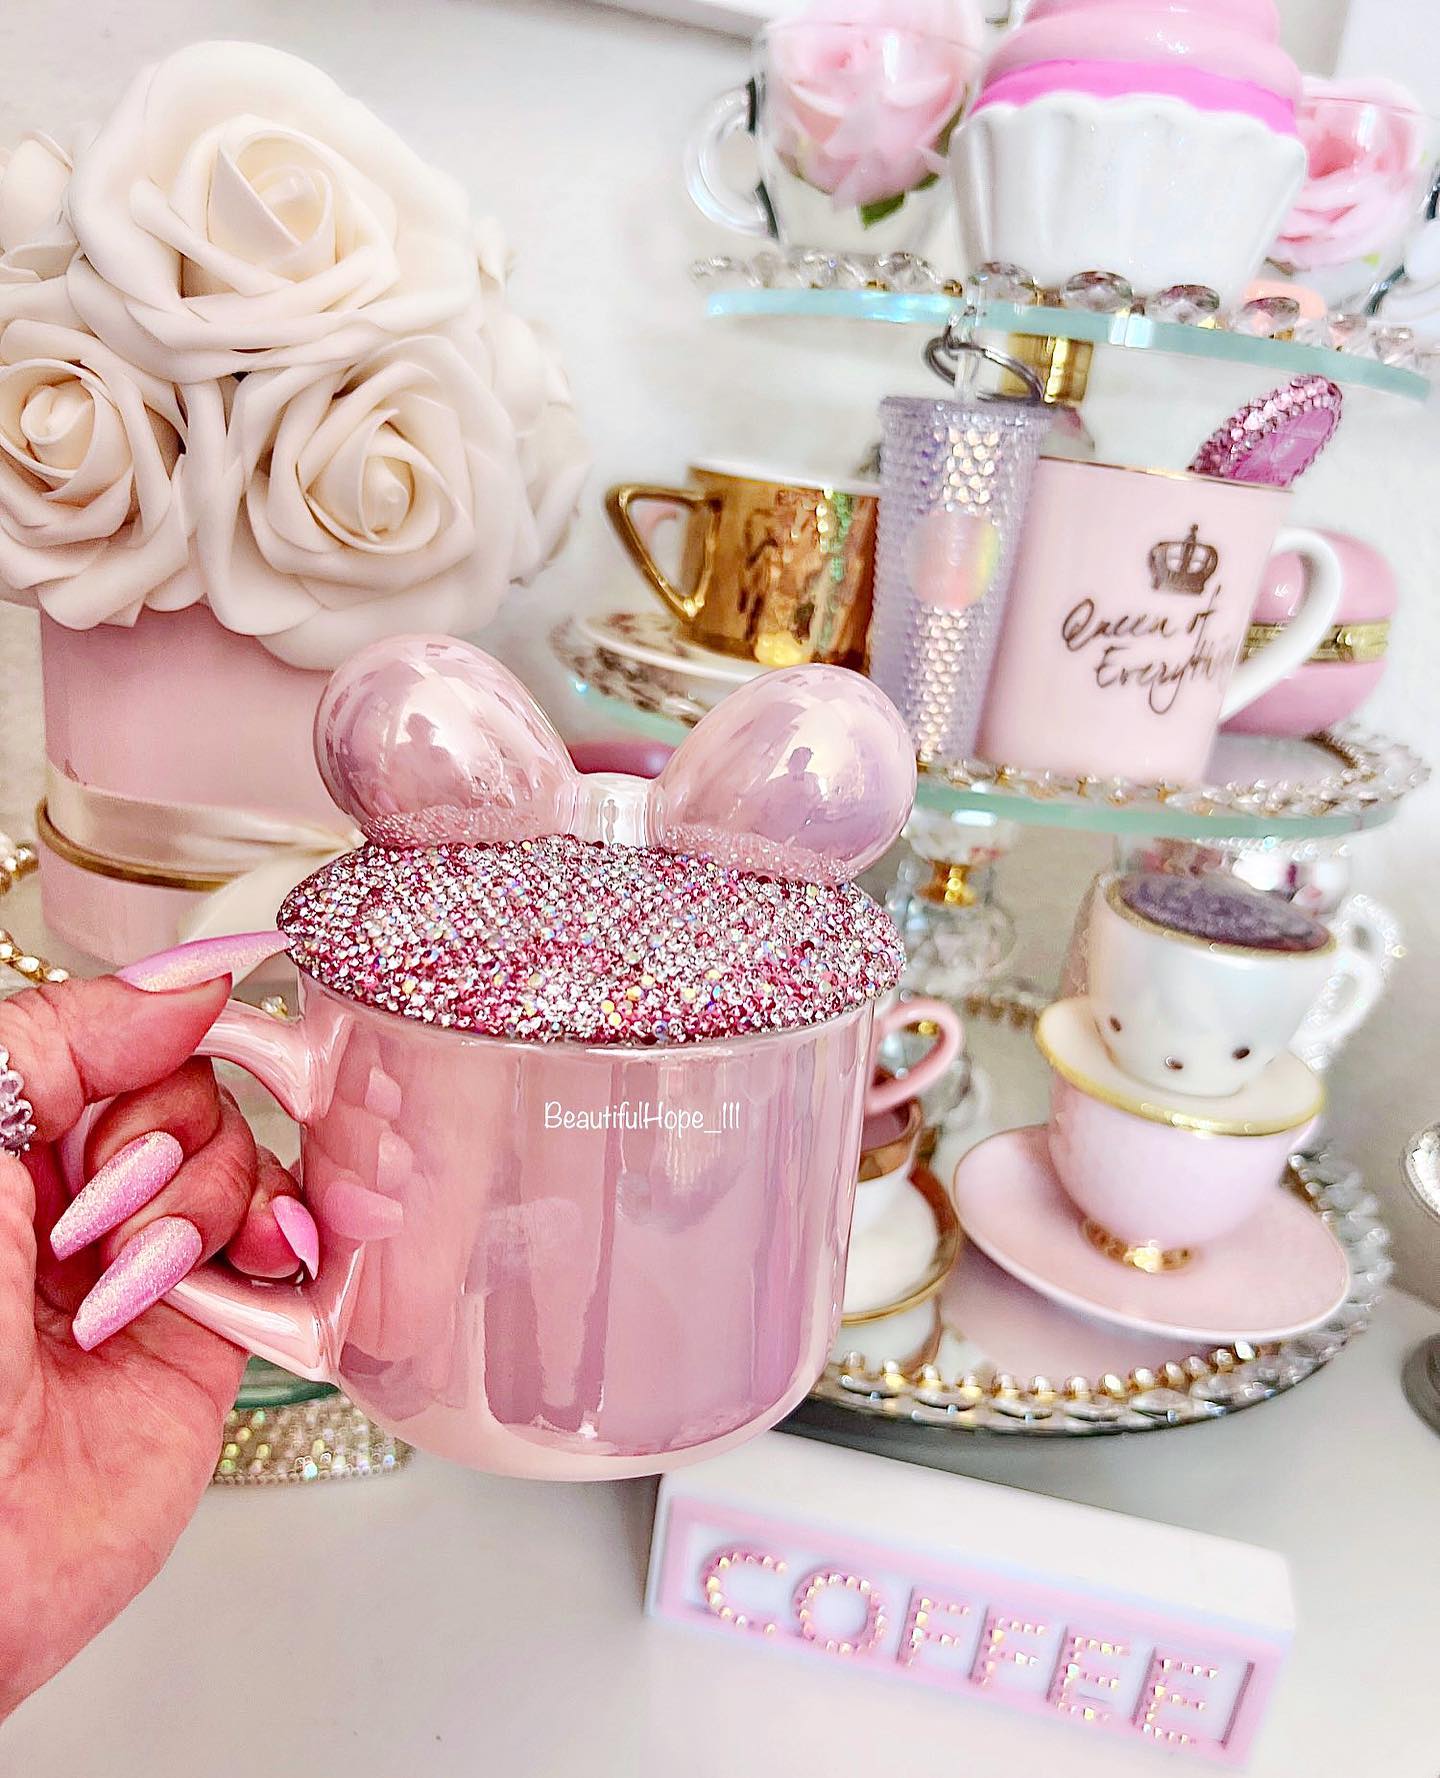 Beautiful Cute Bling Pink Ribbon Bow Mug Cup with the lid